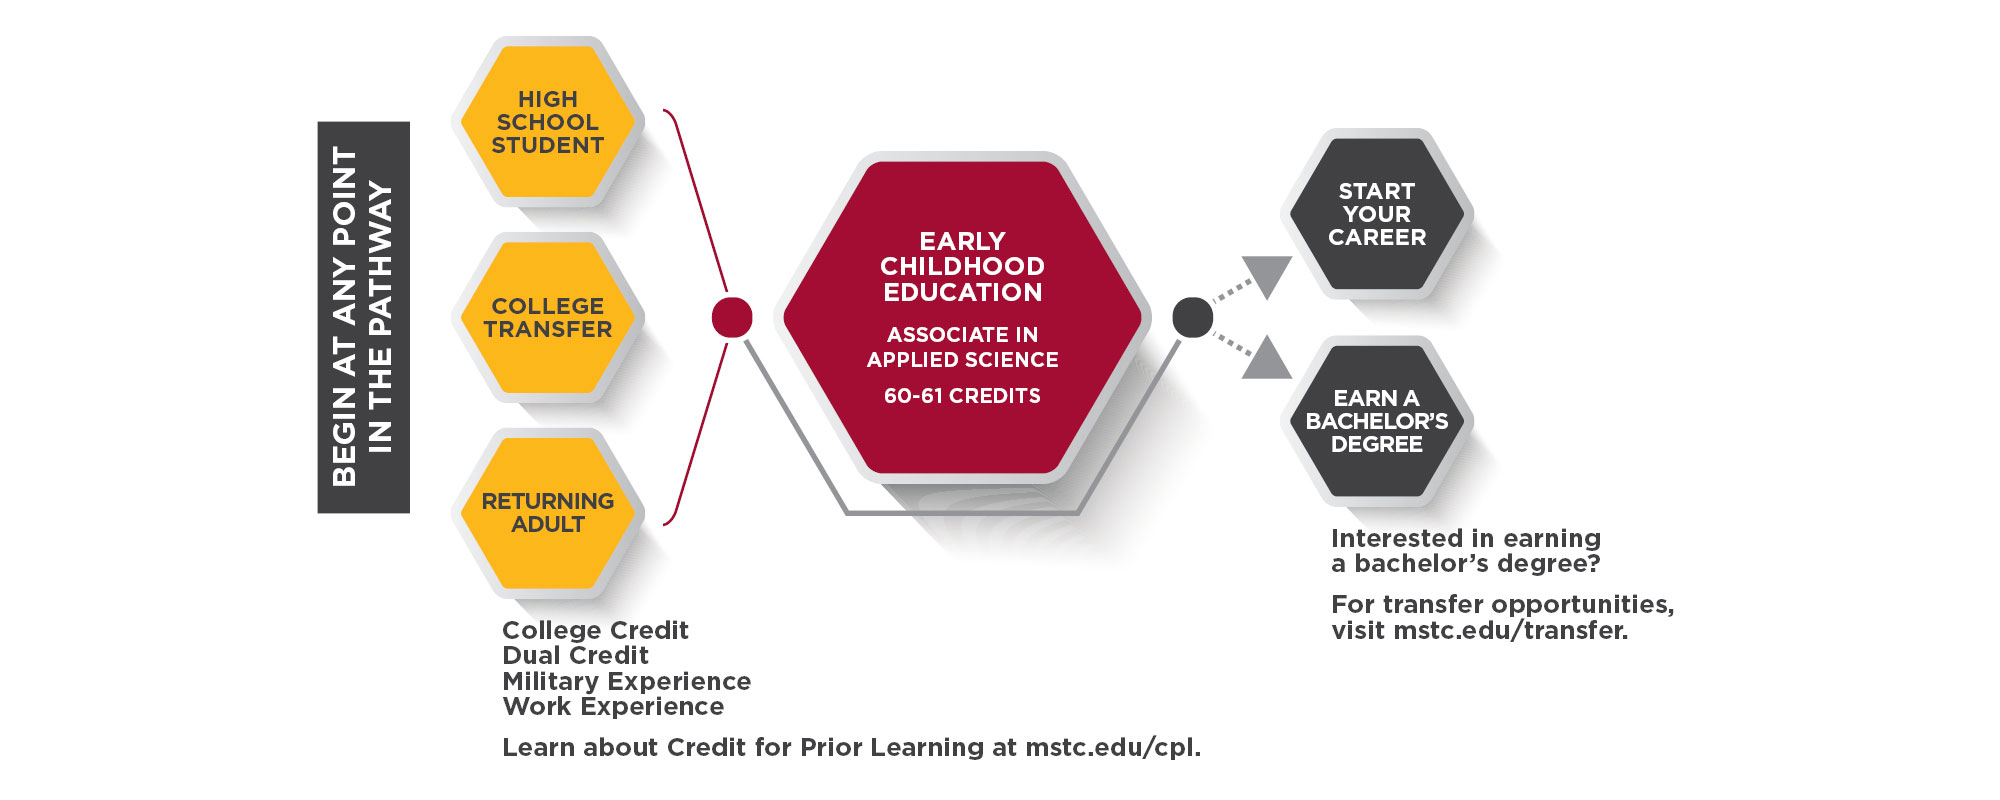 Early Childhood Education Pathway Graphic